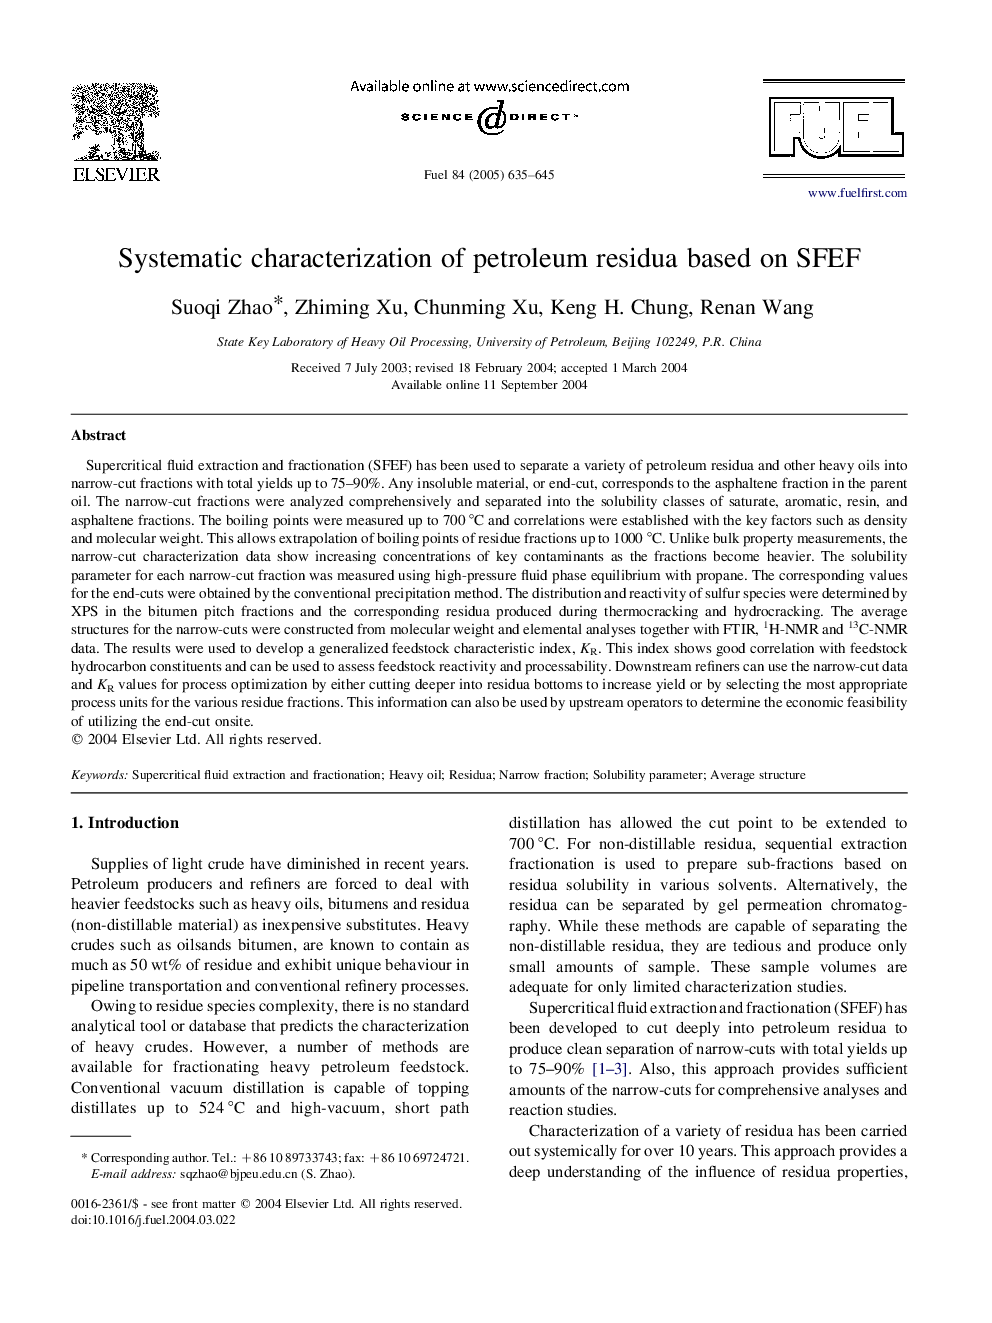 Systematic characterization of petroleum residua based on SFEF